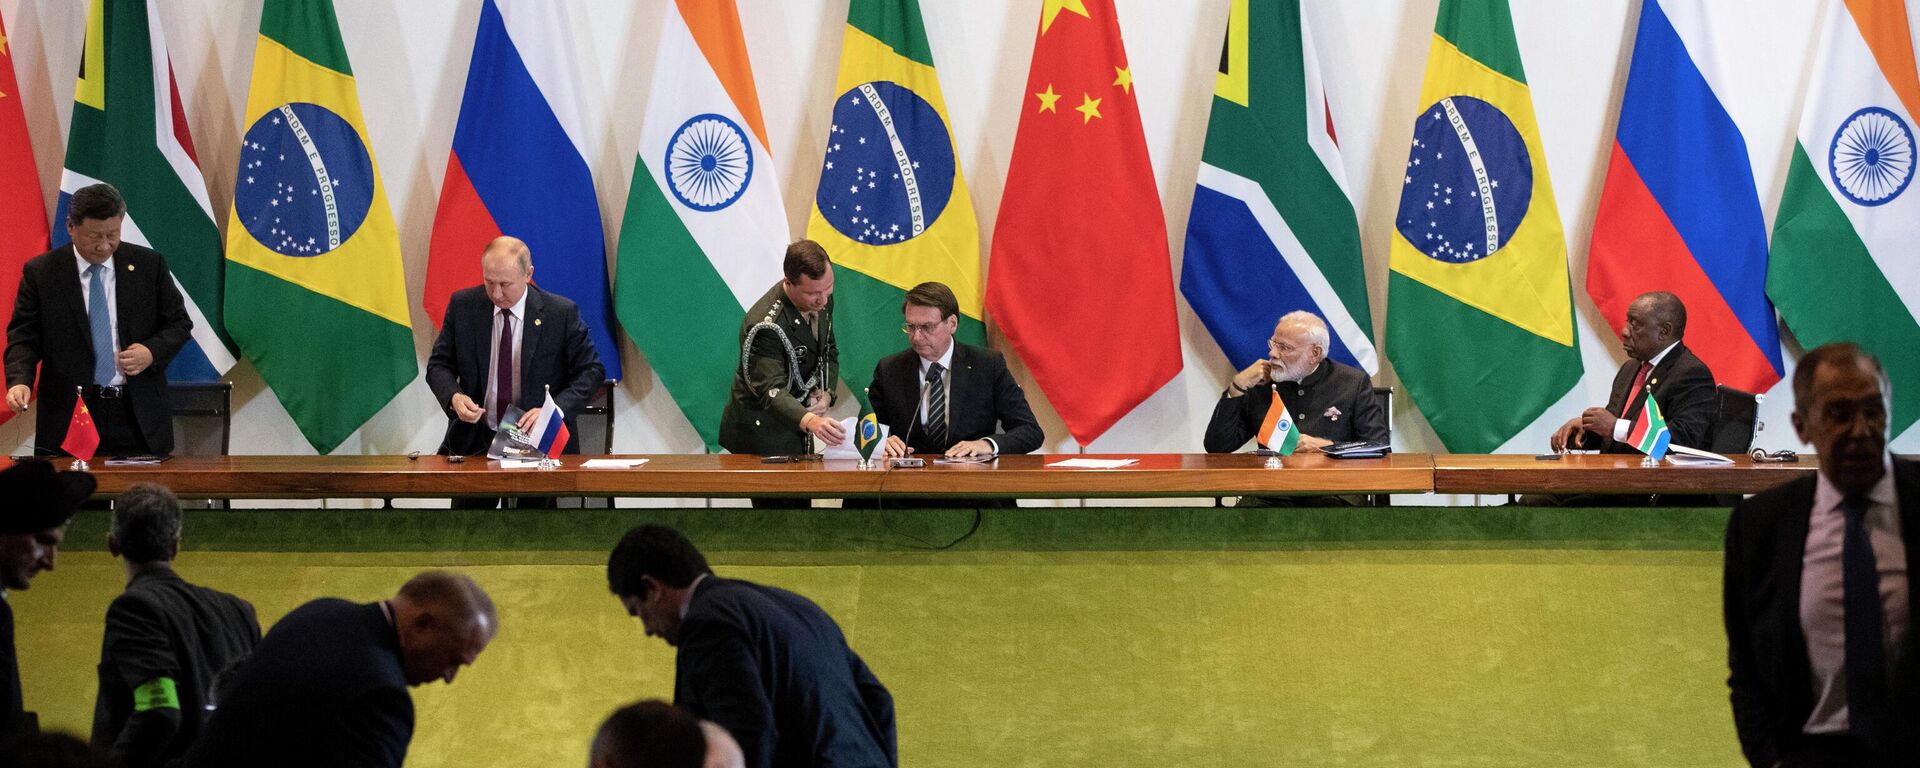 China's President Xi Jinping (L), Russia's President Vladimir Putin (2nd L), Brazil's President Jair Bolsonaro (C), India's Prime Minister Narendra Modi (2nd R), and South Africa's President Cyril Ramaphosa (R) attend to a meeting with members of the Business Council and management of the New Development Bank during the BRICS Summit in Brasilia, November 14, 2019. (Photo by Pavel Golovkin / POOL / AFP) - Sputnik International, 1920, 14.07.2022